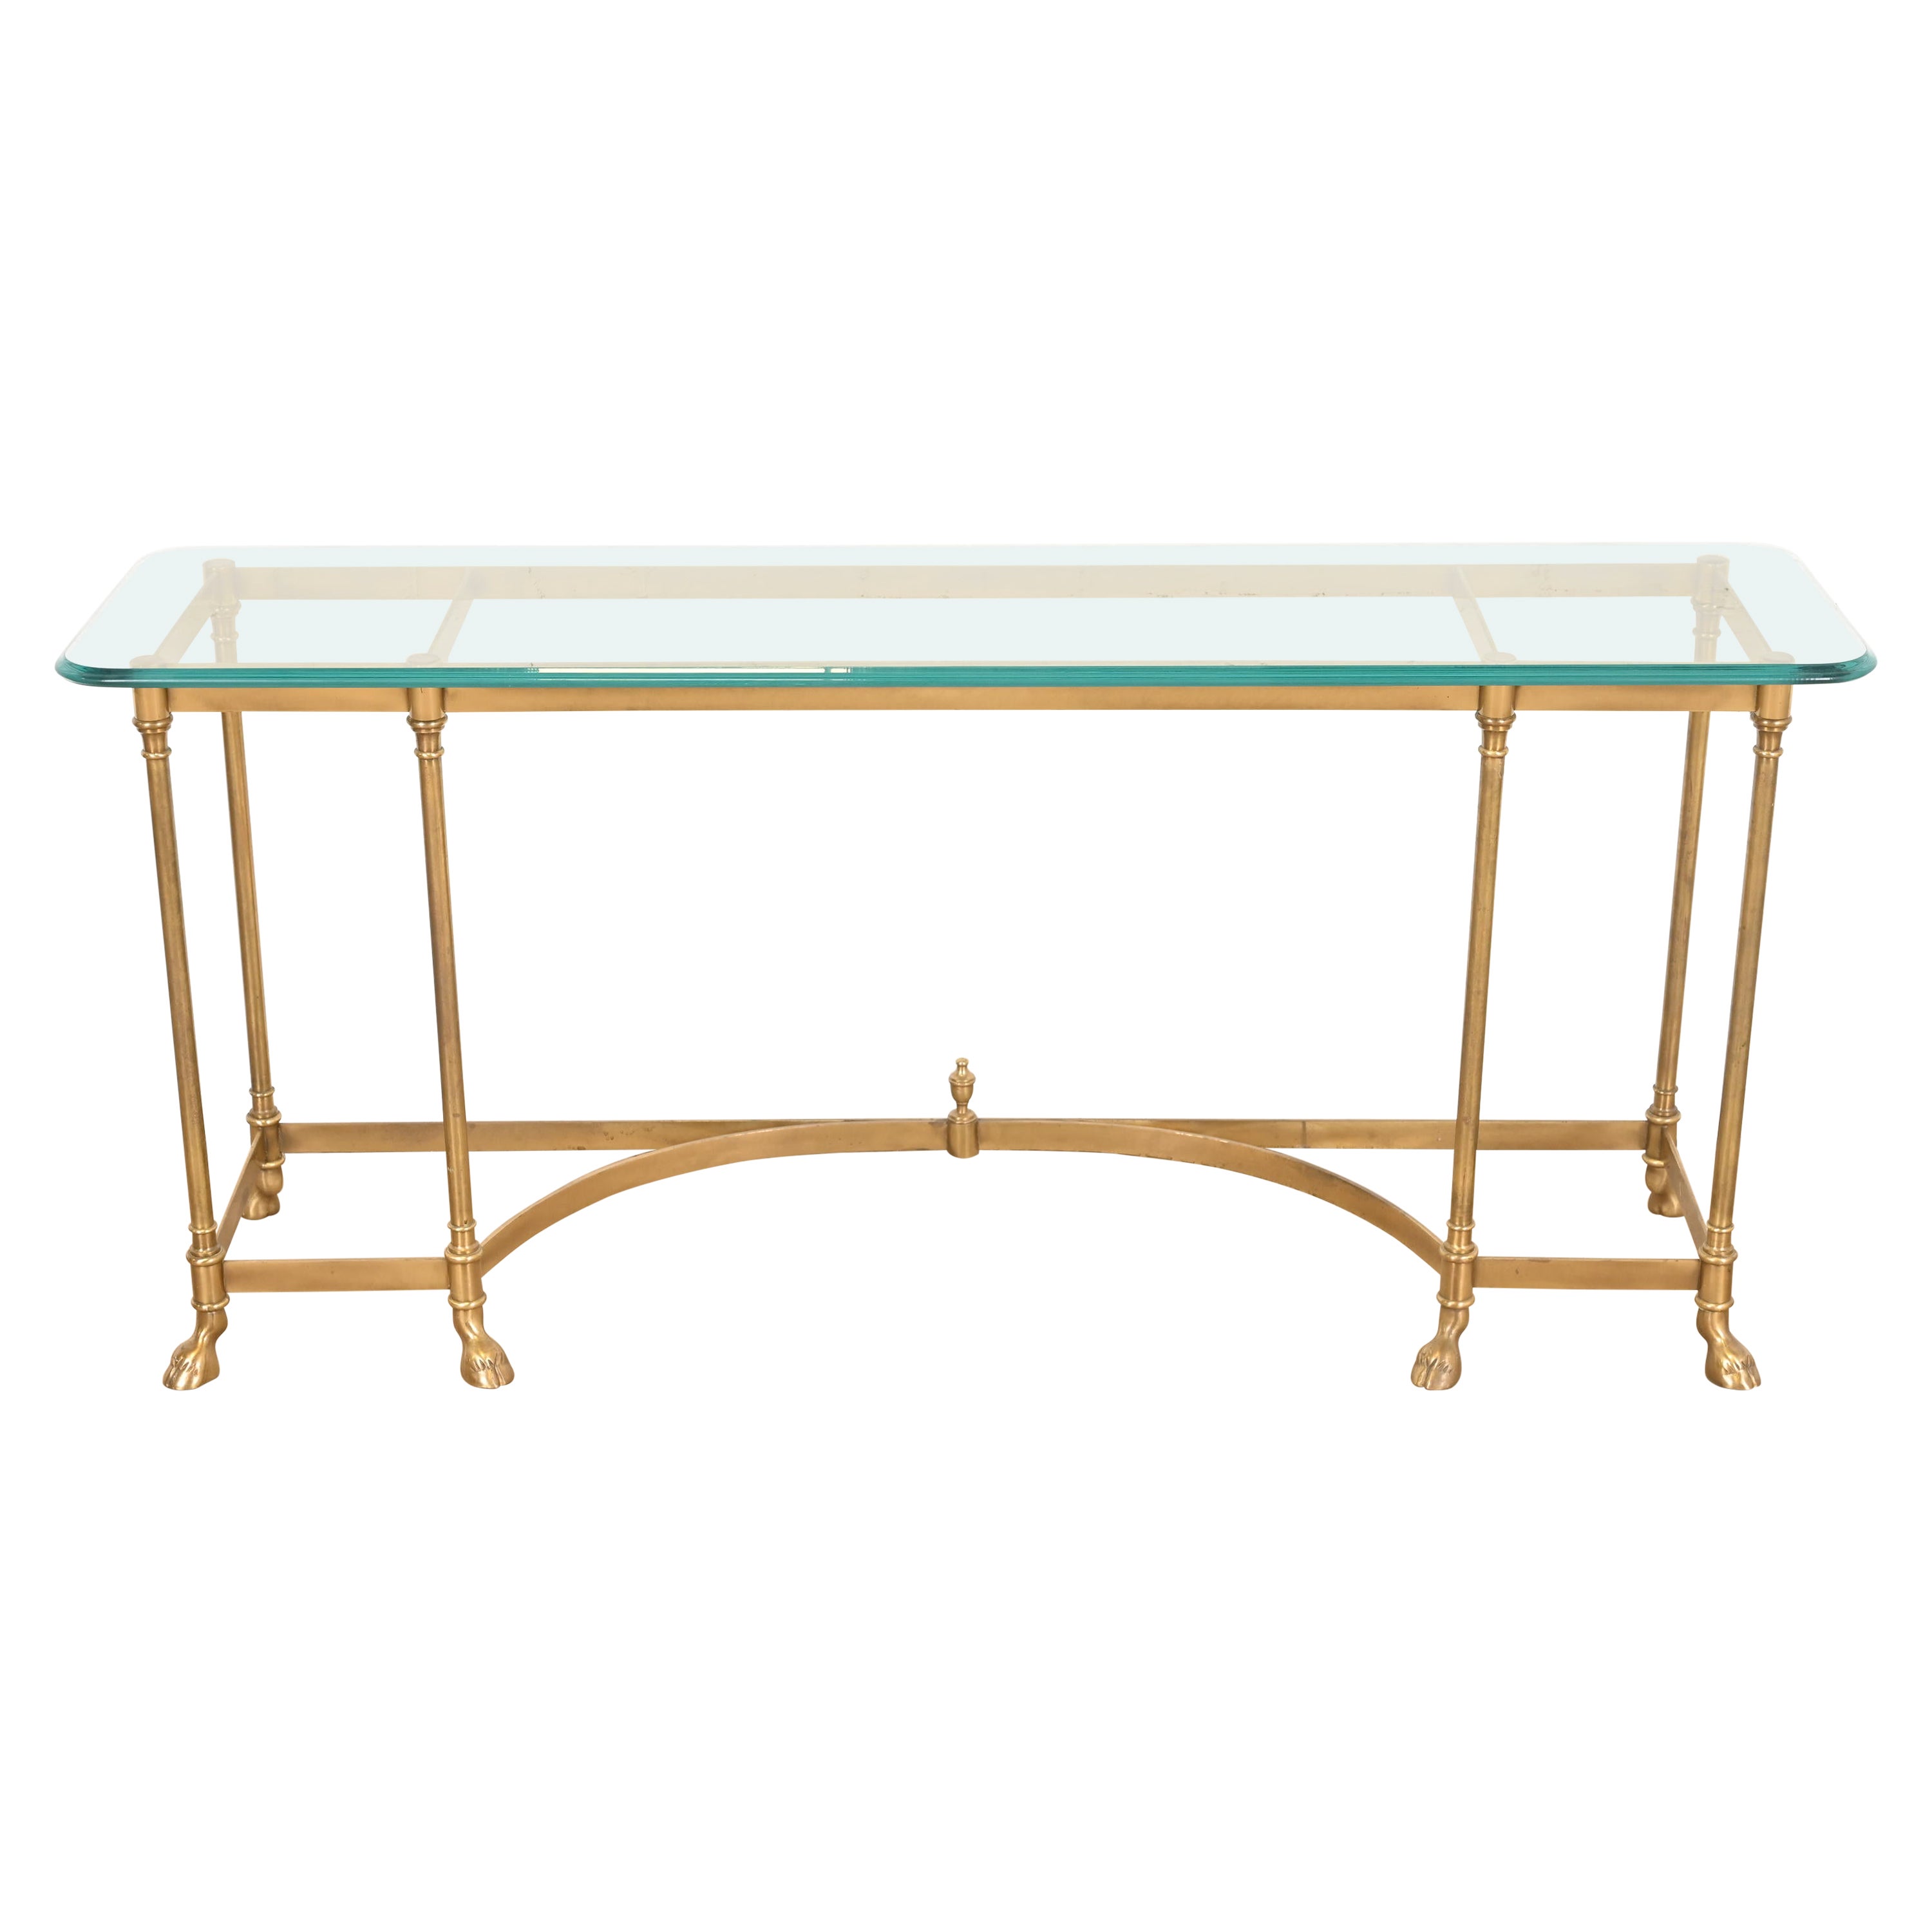 Labarge Hollywood Regency Brass and Glass Hooved Feet Console Table, Circa 1960s For Sale